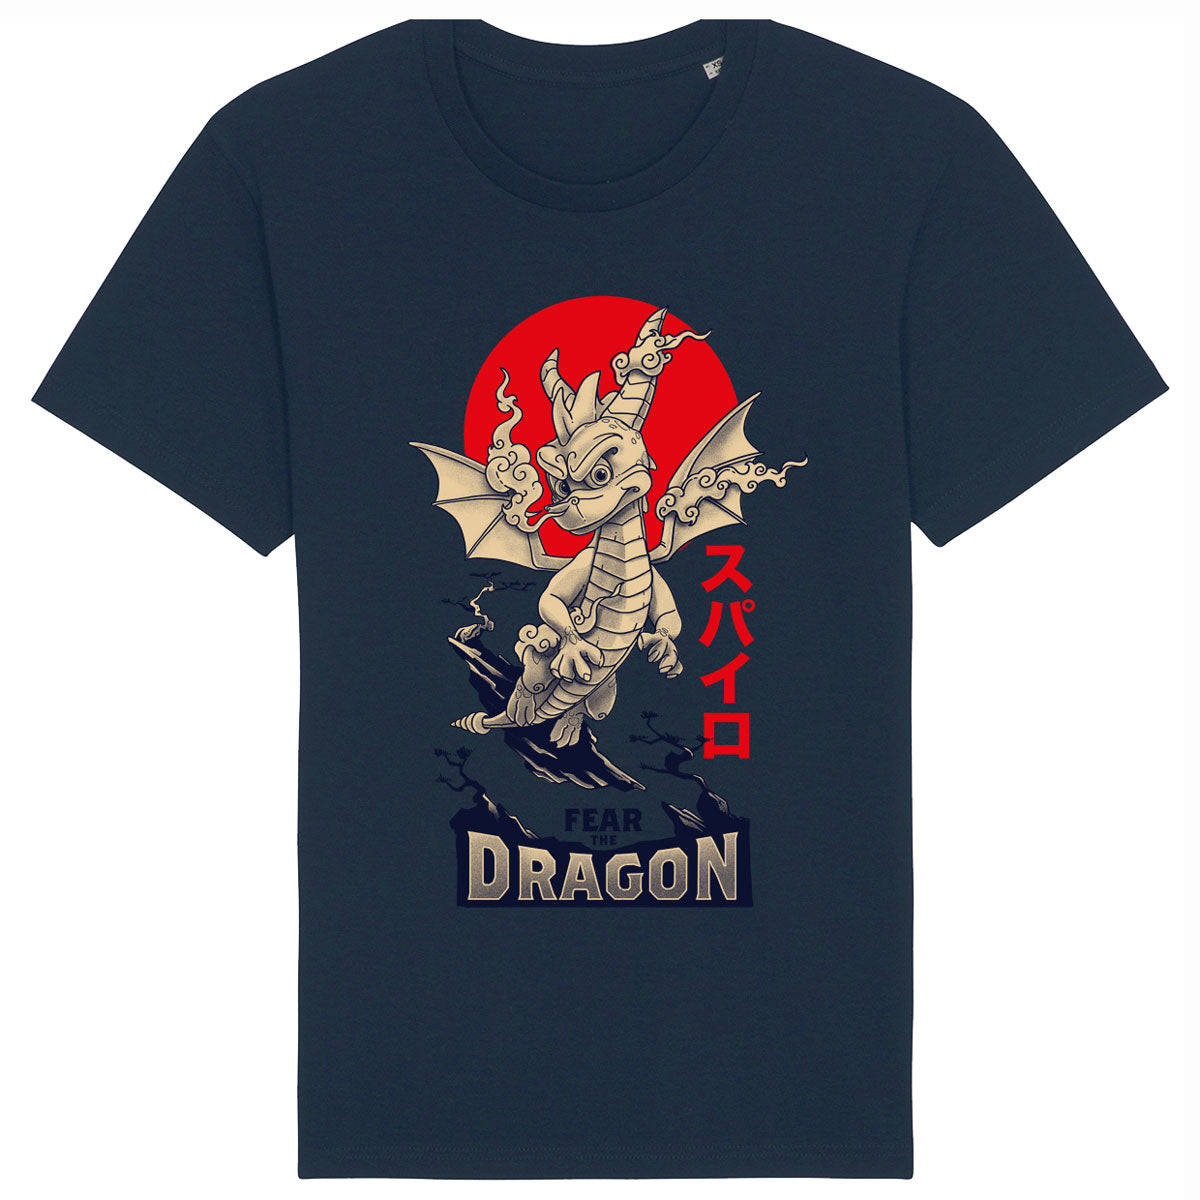 Spyro Fear The Dragon T-shirt with Japanese Rising Sun on Navy Crew Neck